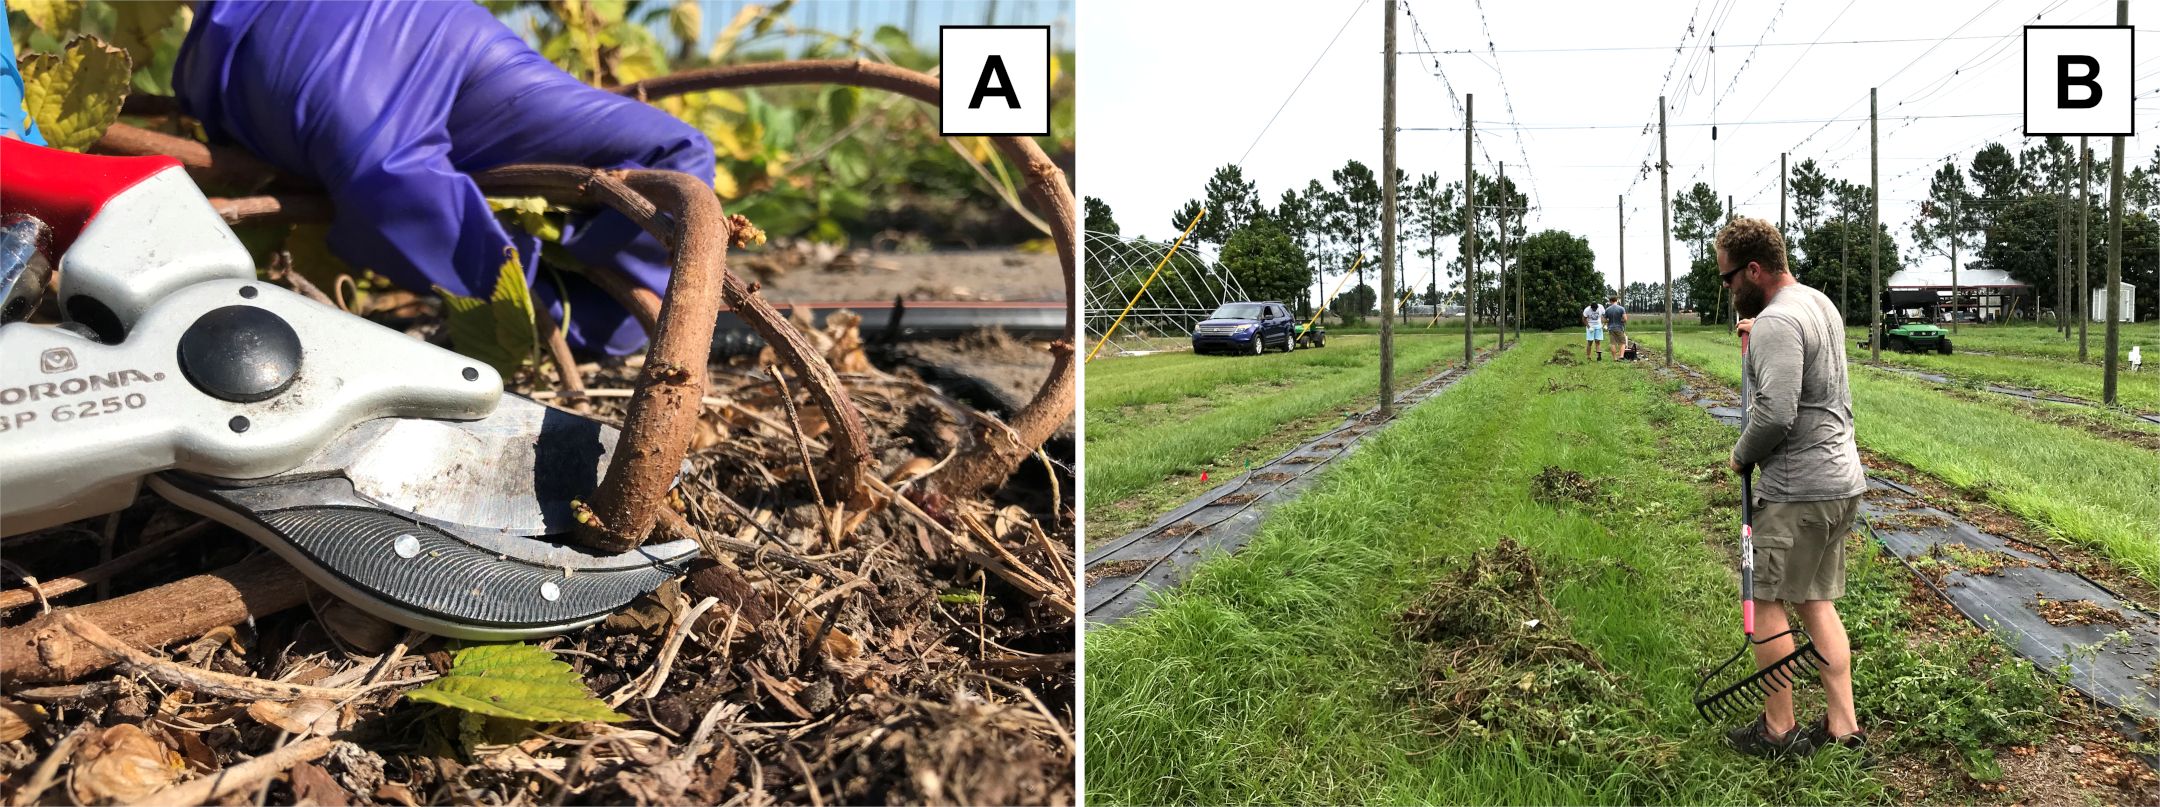 Pruning of hop bines using a hand pruner (A) and cleanup of debris after pruning (B) in the UF/IFAS GCREC hopyard. 